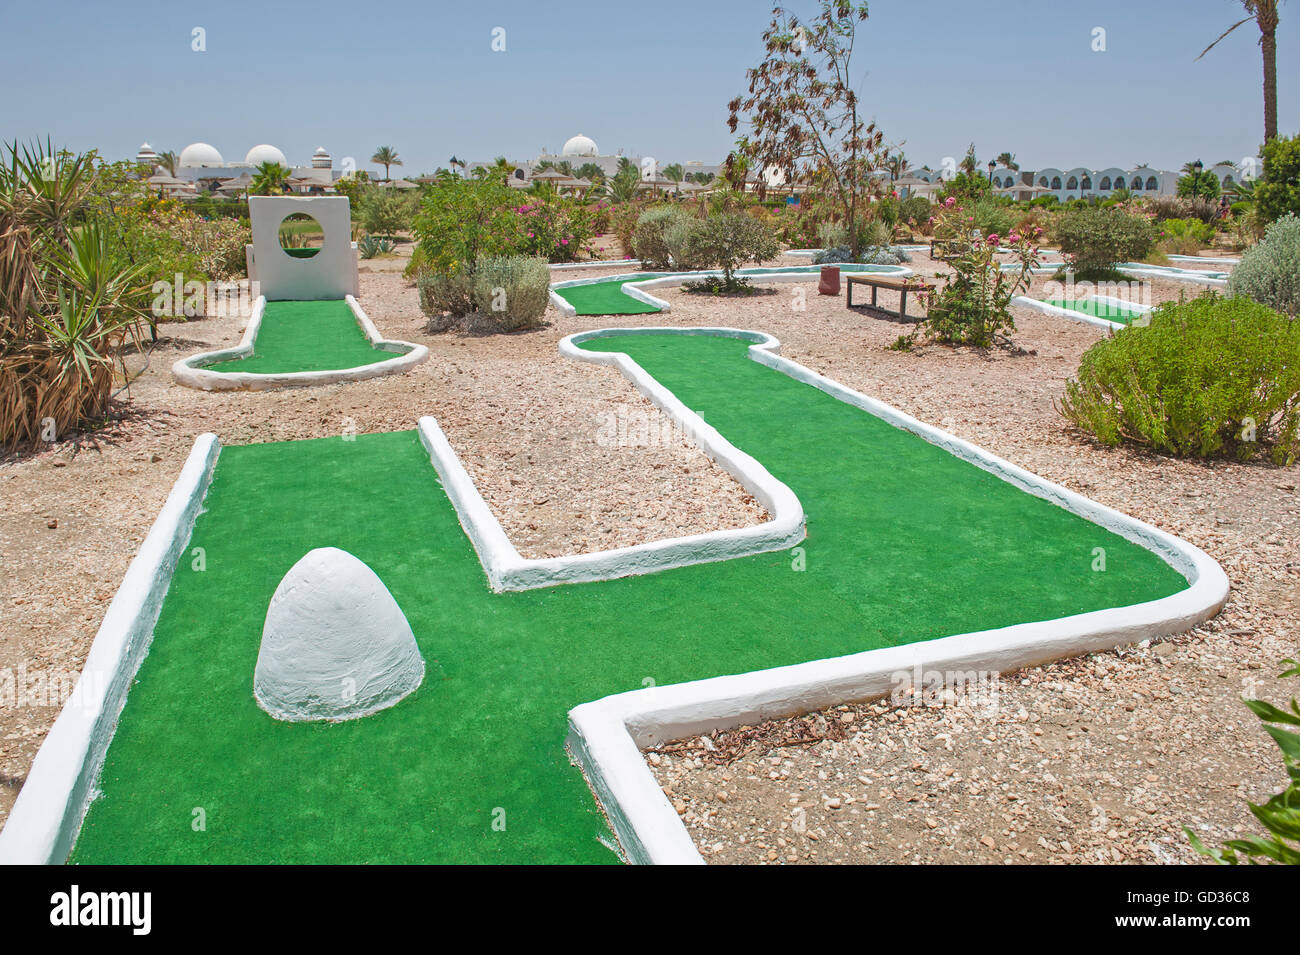 Mini Golf Course In Landscape Gardens Of Luxury Tropical Hotel